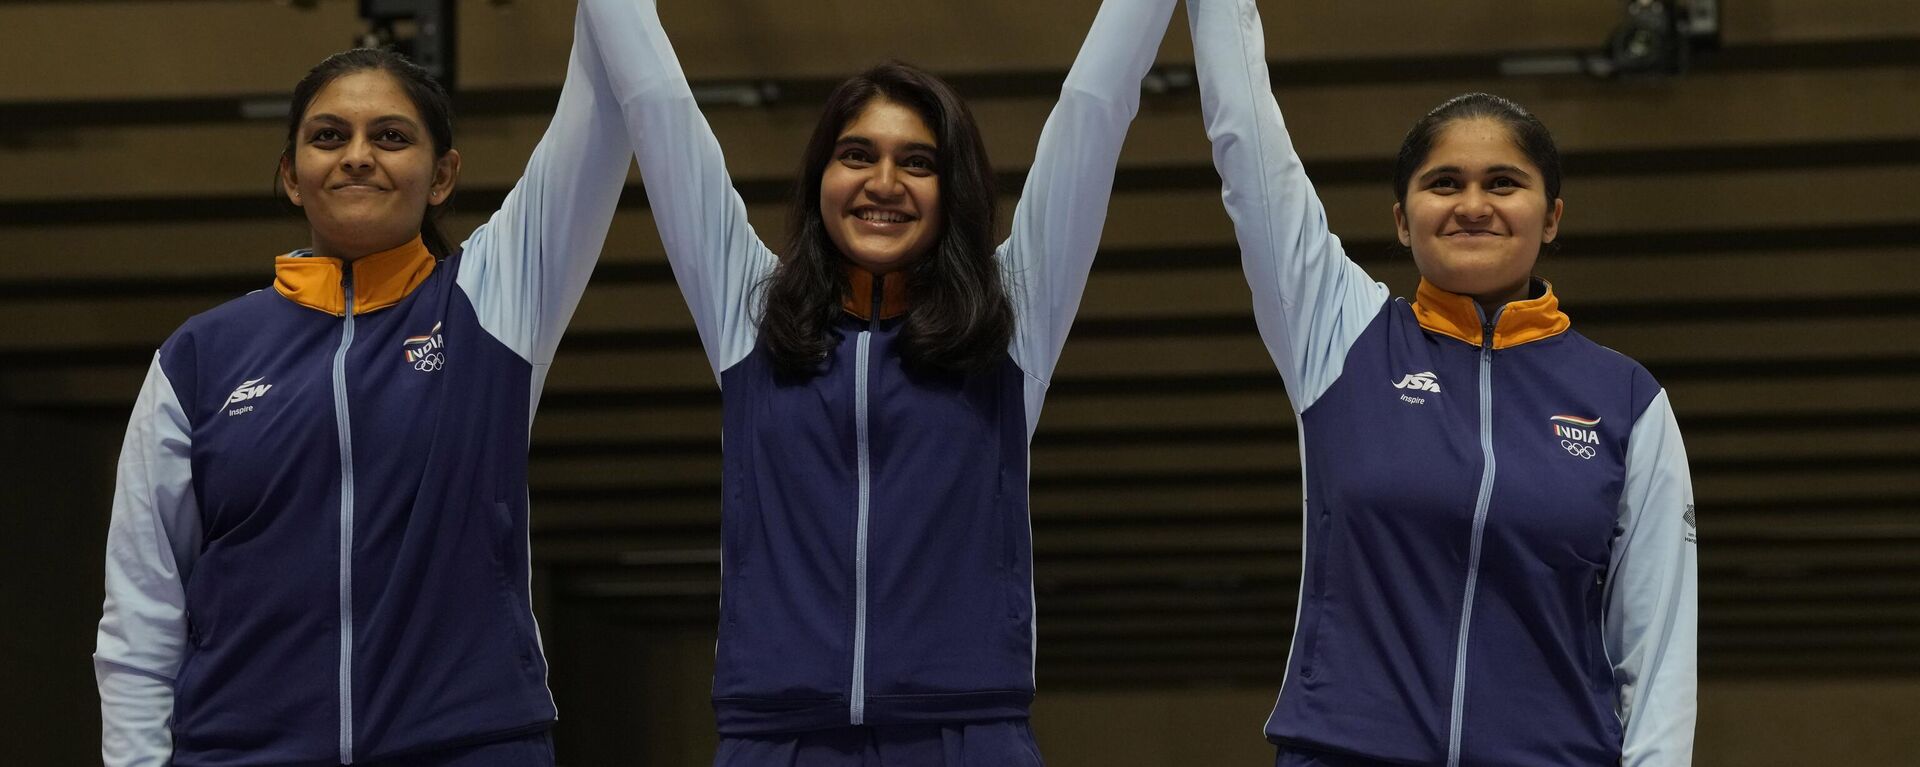 Silver medalists India's Divya Thadigol Subbraju, Esha Singh, Palak celebrate on the podium at the awards ceremony for the Shooting 10m Air Pistol Team Women's Final of the 19th Asian Games in Hangzhou, China, Friday, Sept. 29, 2023. - Sputnik भारत, 1920, 29.09.2023